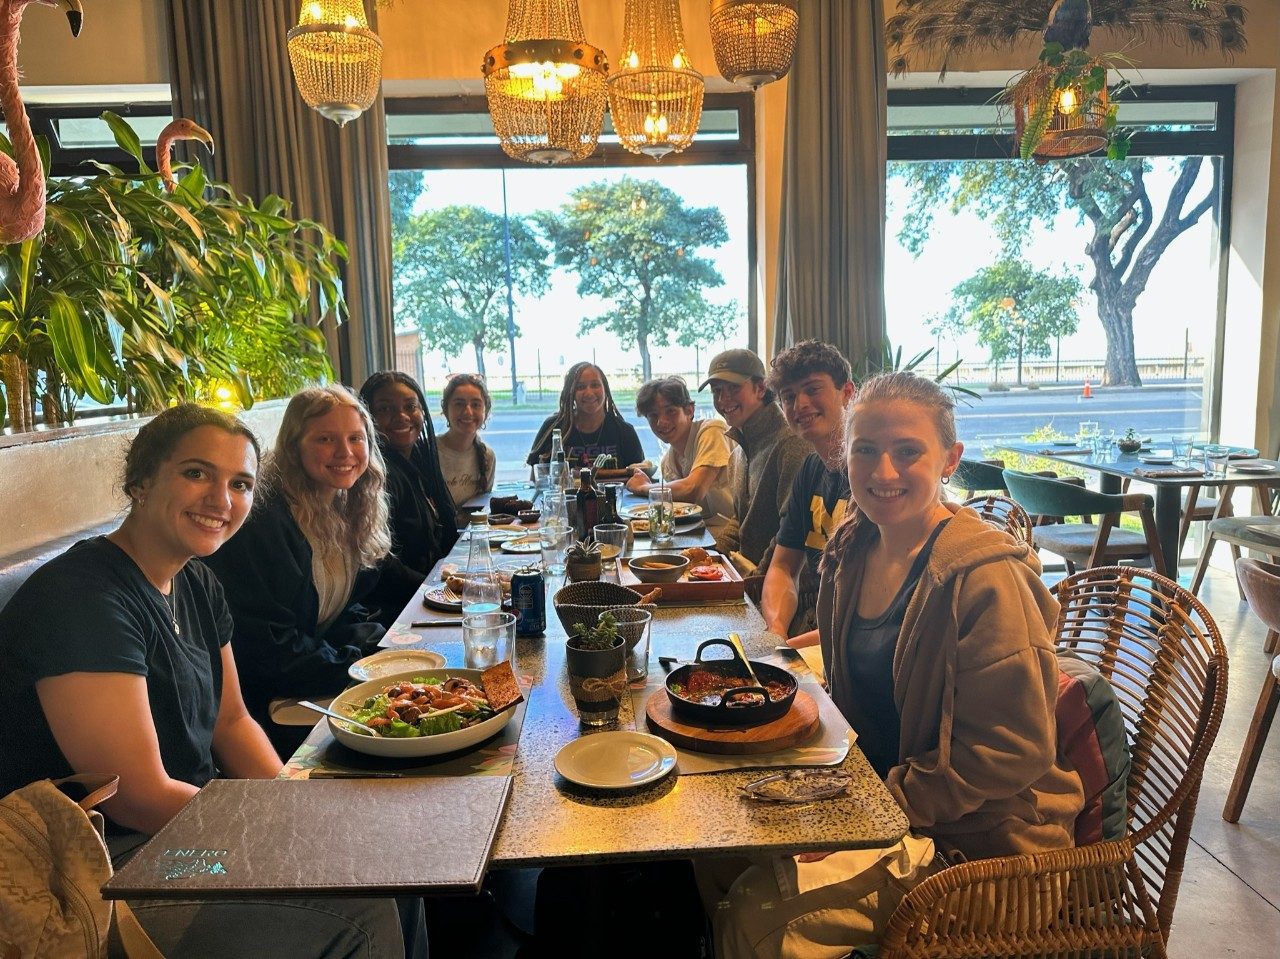 The Buenos Aires cohort sits down to share a meal together at a cozy restaurant.